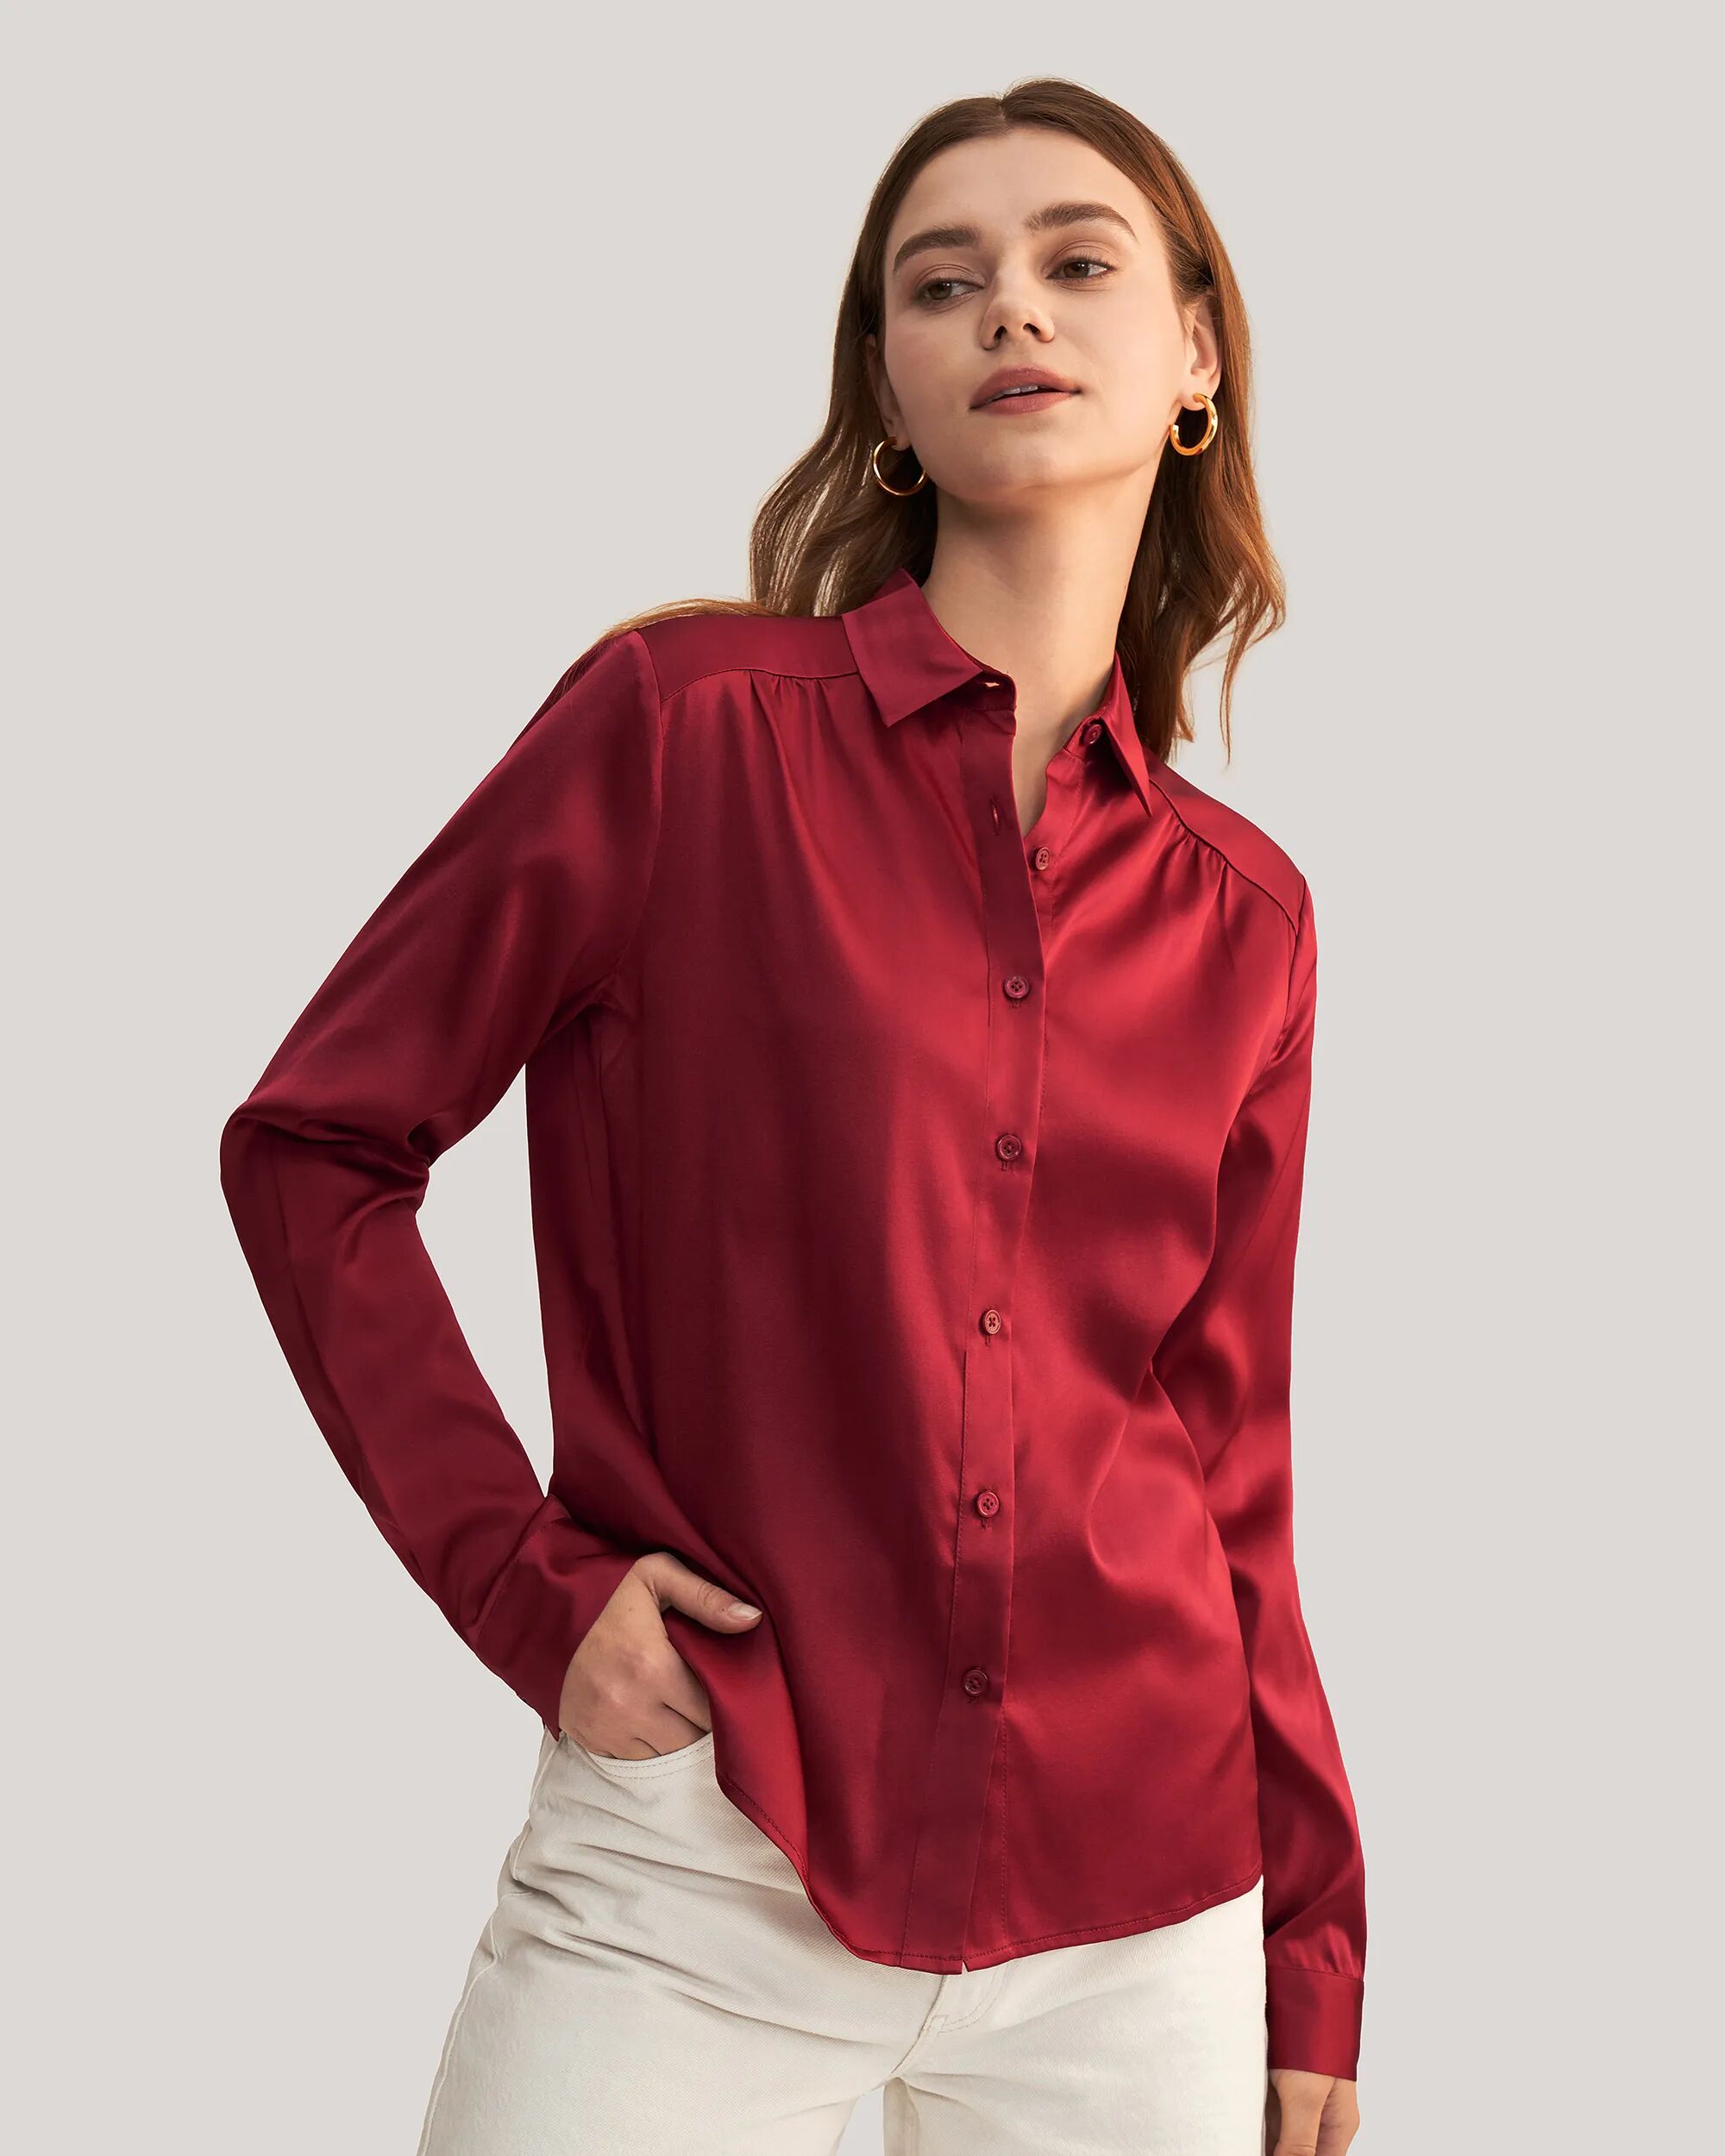 LILYSILK Business Red Burgundy Silk Shirt   Solid Long Sleeves Style   Classic Silk Quality Guranteed Add Luxury To Home